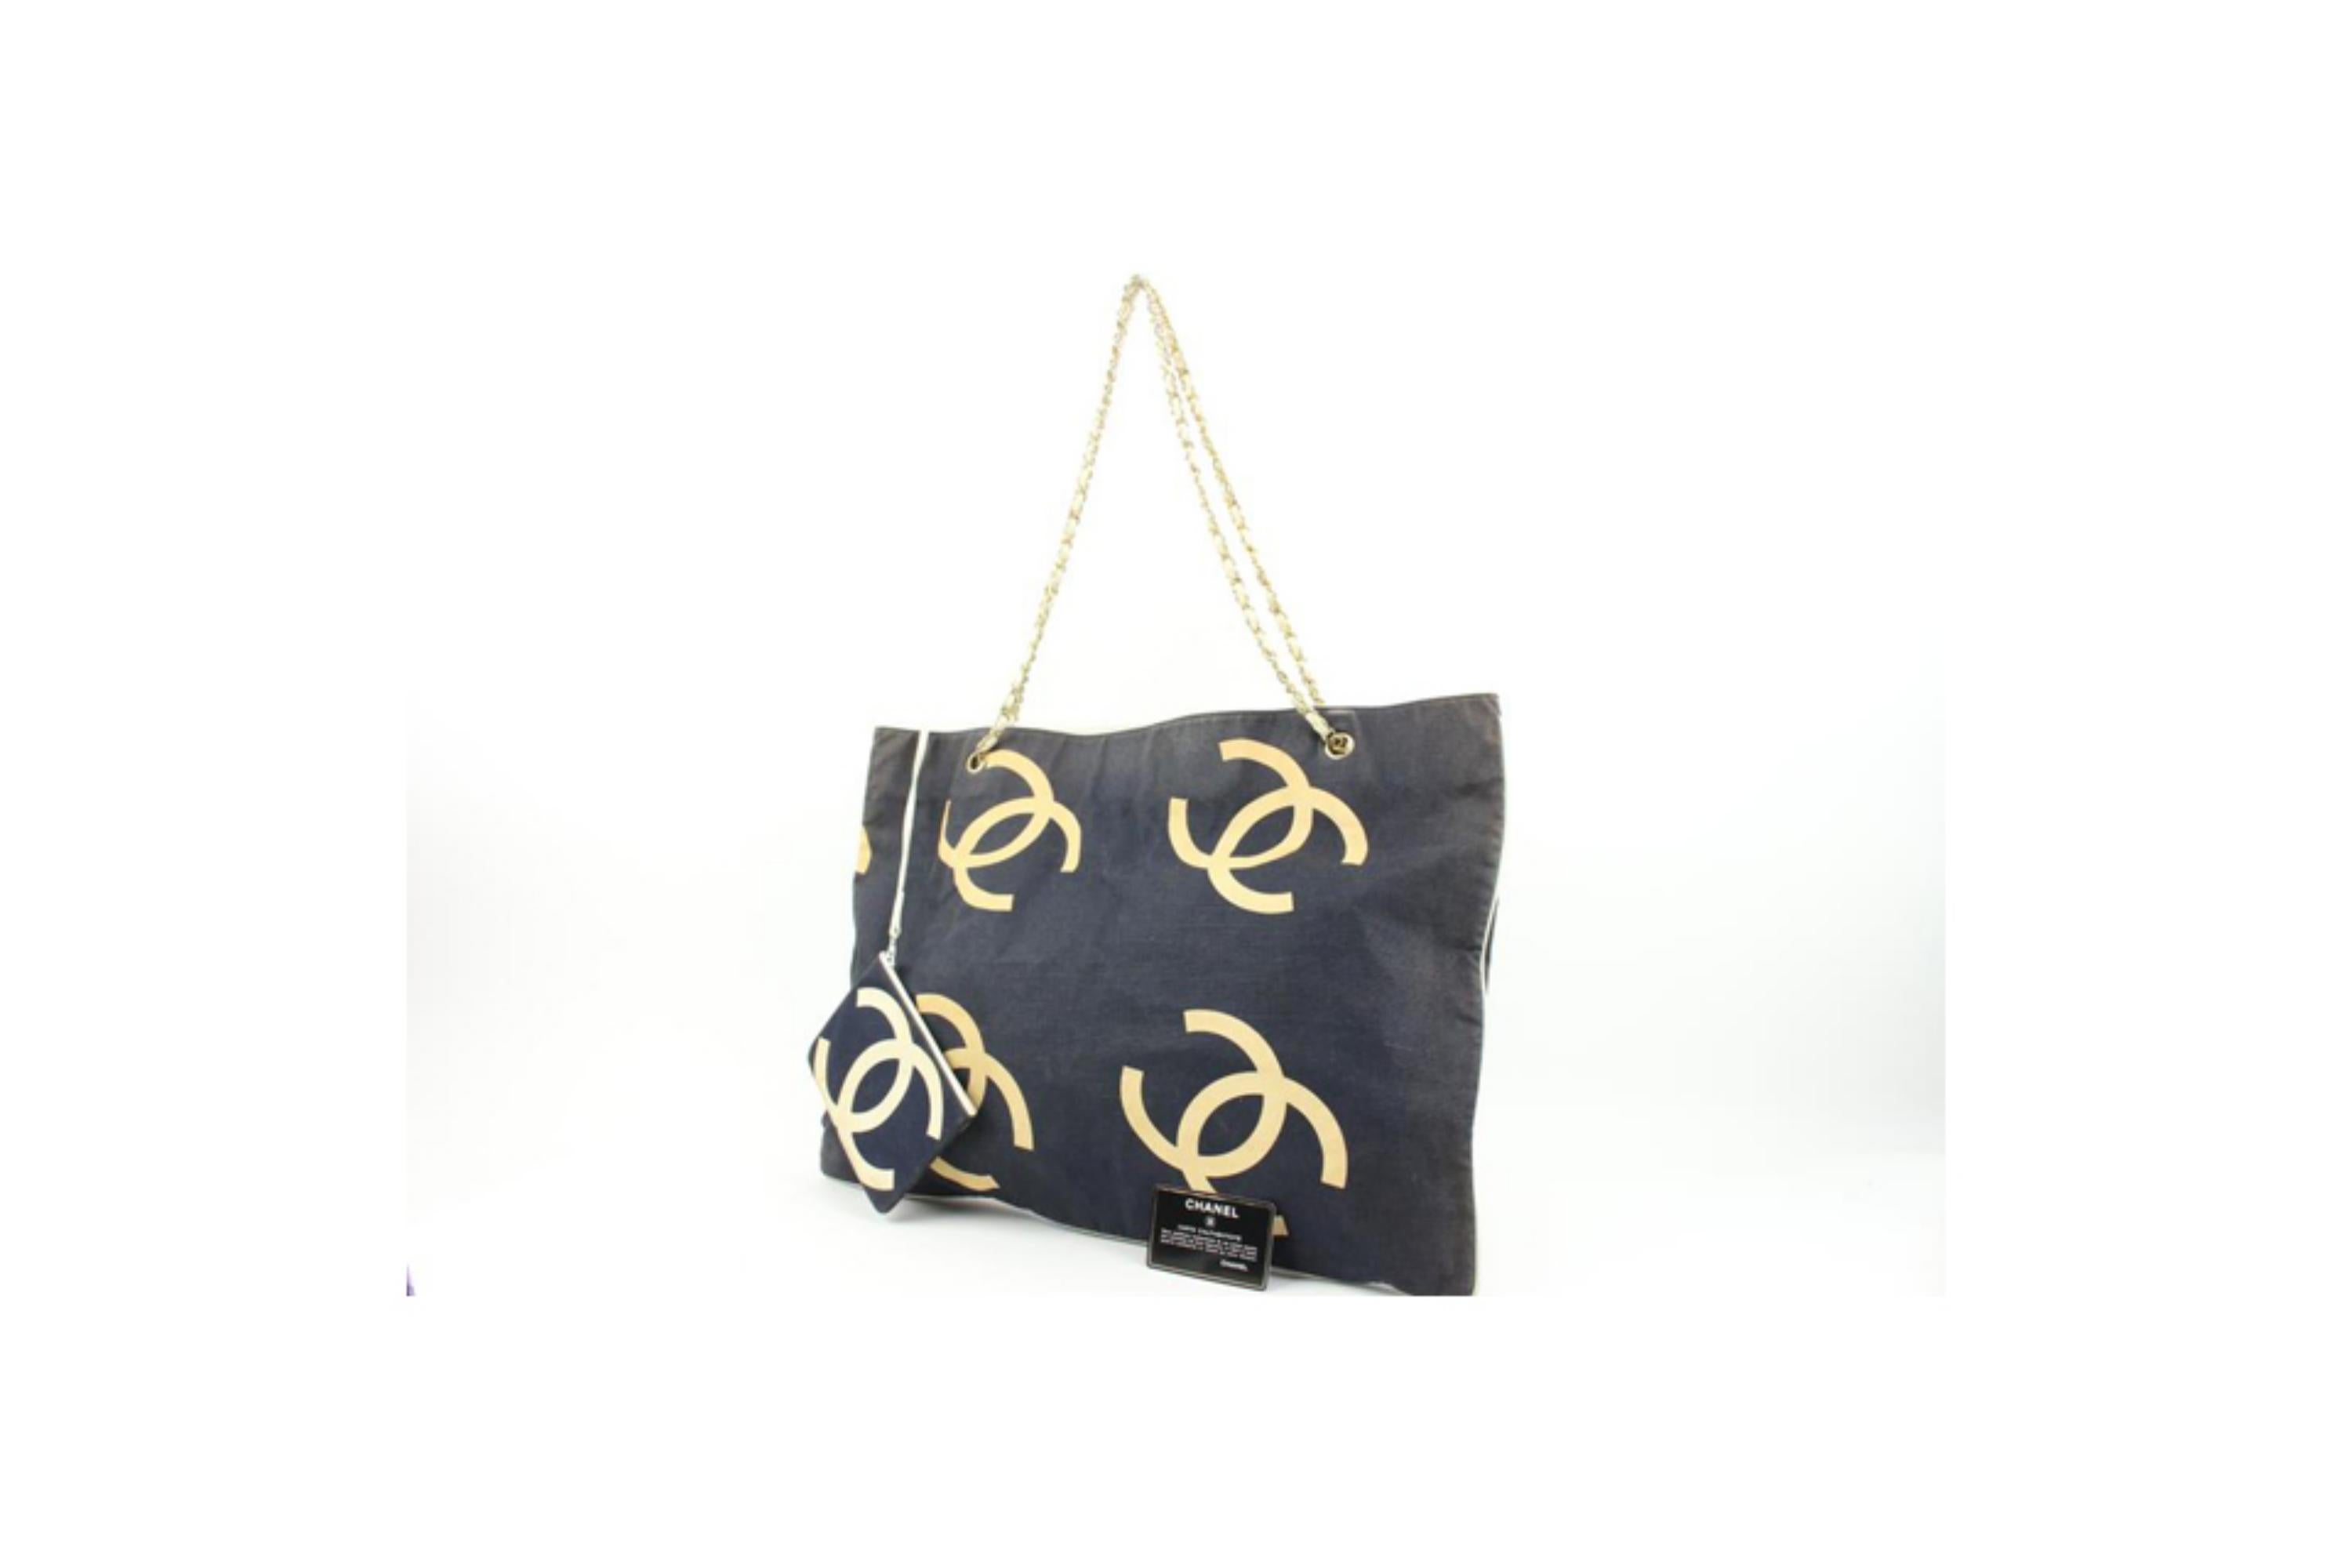 Chanel Navy x Beige Jumbo CC Chain Tote with Pouch 66c23s
Date Code/Serial Number: 0847140
Made In: Italy
Measurements: Length:  21.5